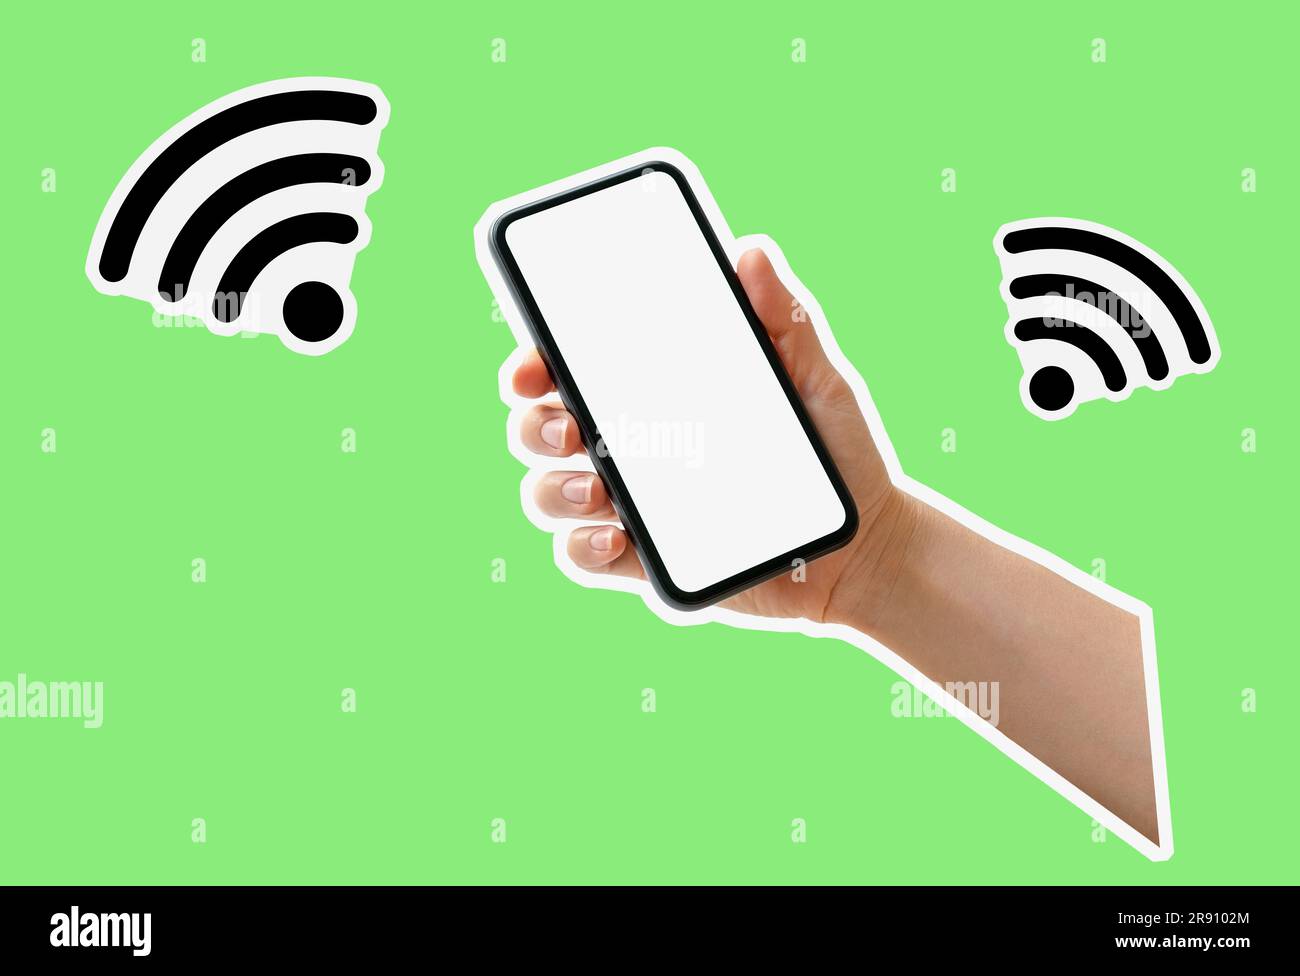 Cut out style composite image wi-fi icons and photo of smart phone with blank white screen in a hand on green background. Stock Photo